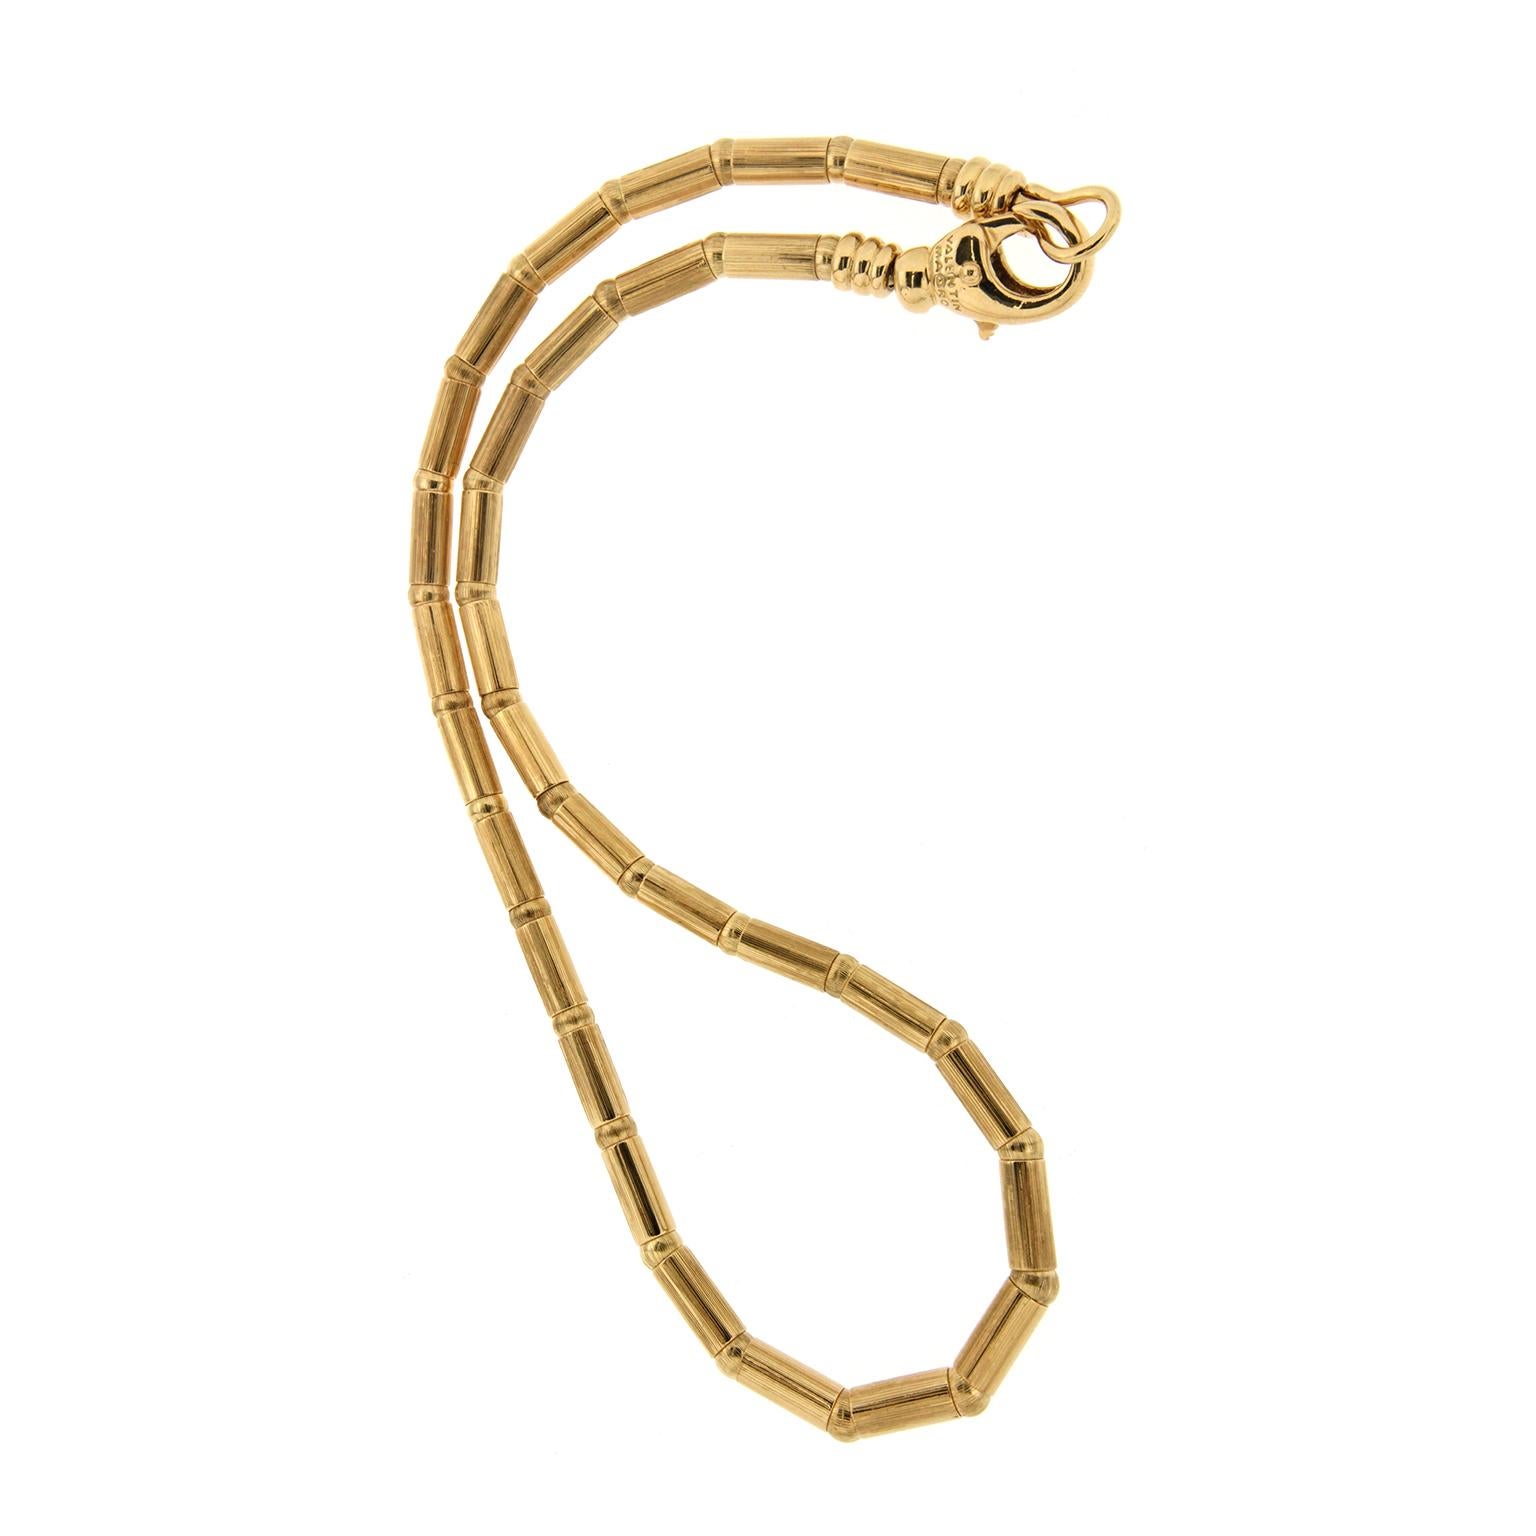 This understated necklace created by Valentin Magro consists of alternating tubes and balls. The design showcases the shaping possibilities of precious metal. 18k yellow gold makes up the entire piece. It hooks in back with a large lobster clasp.